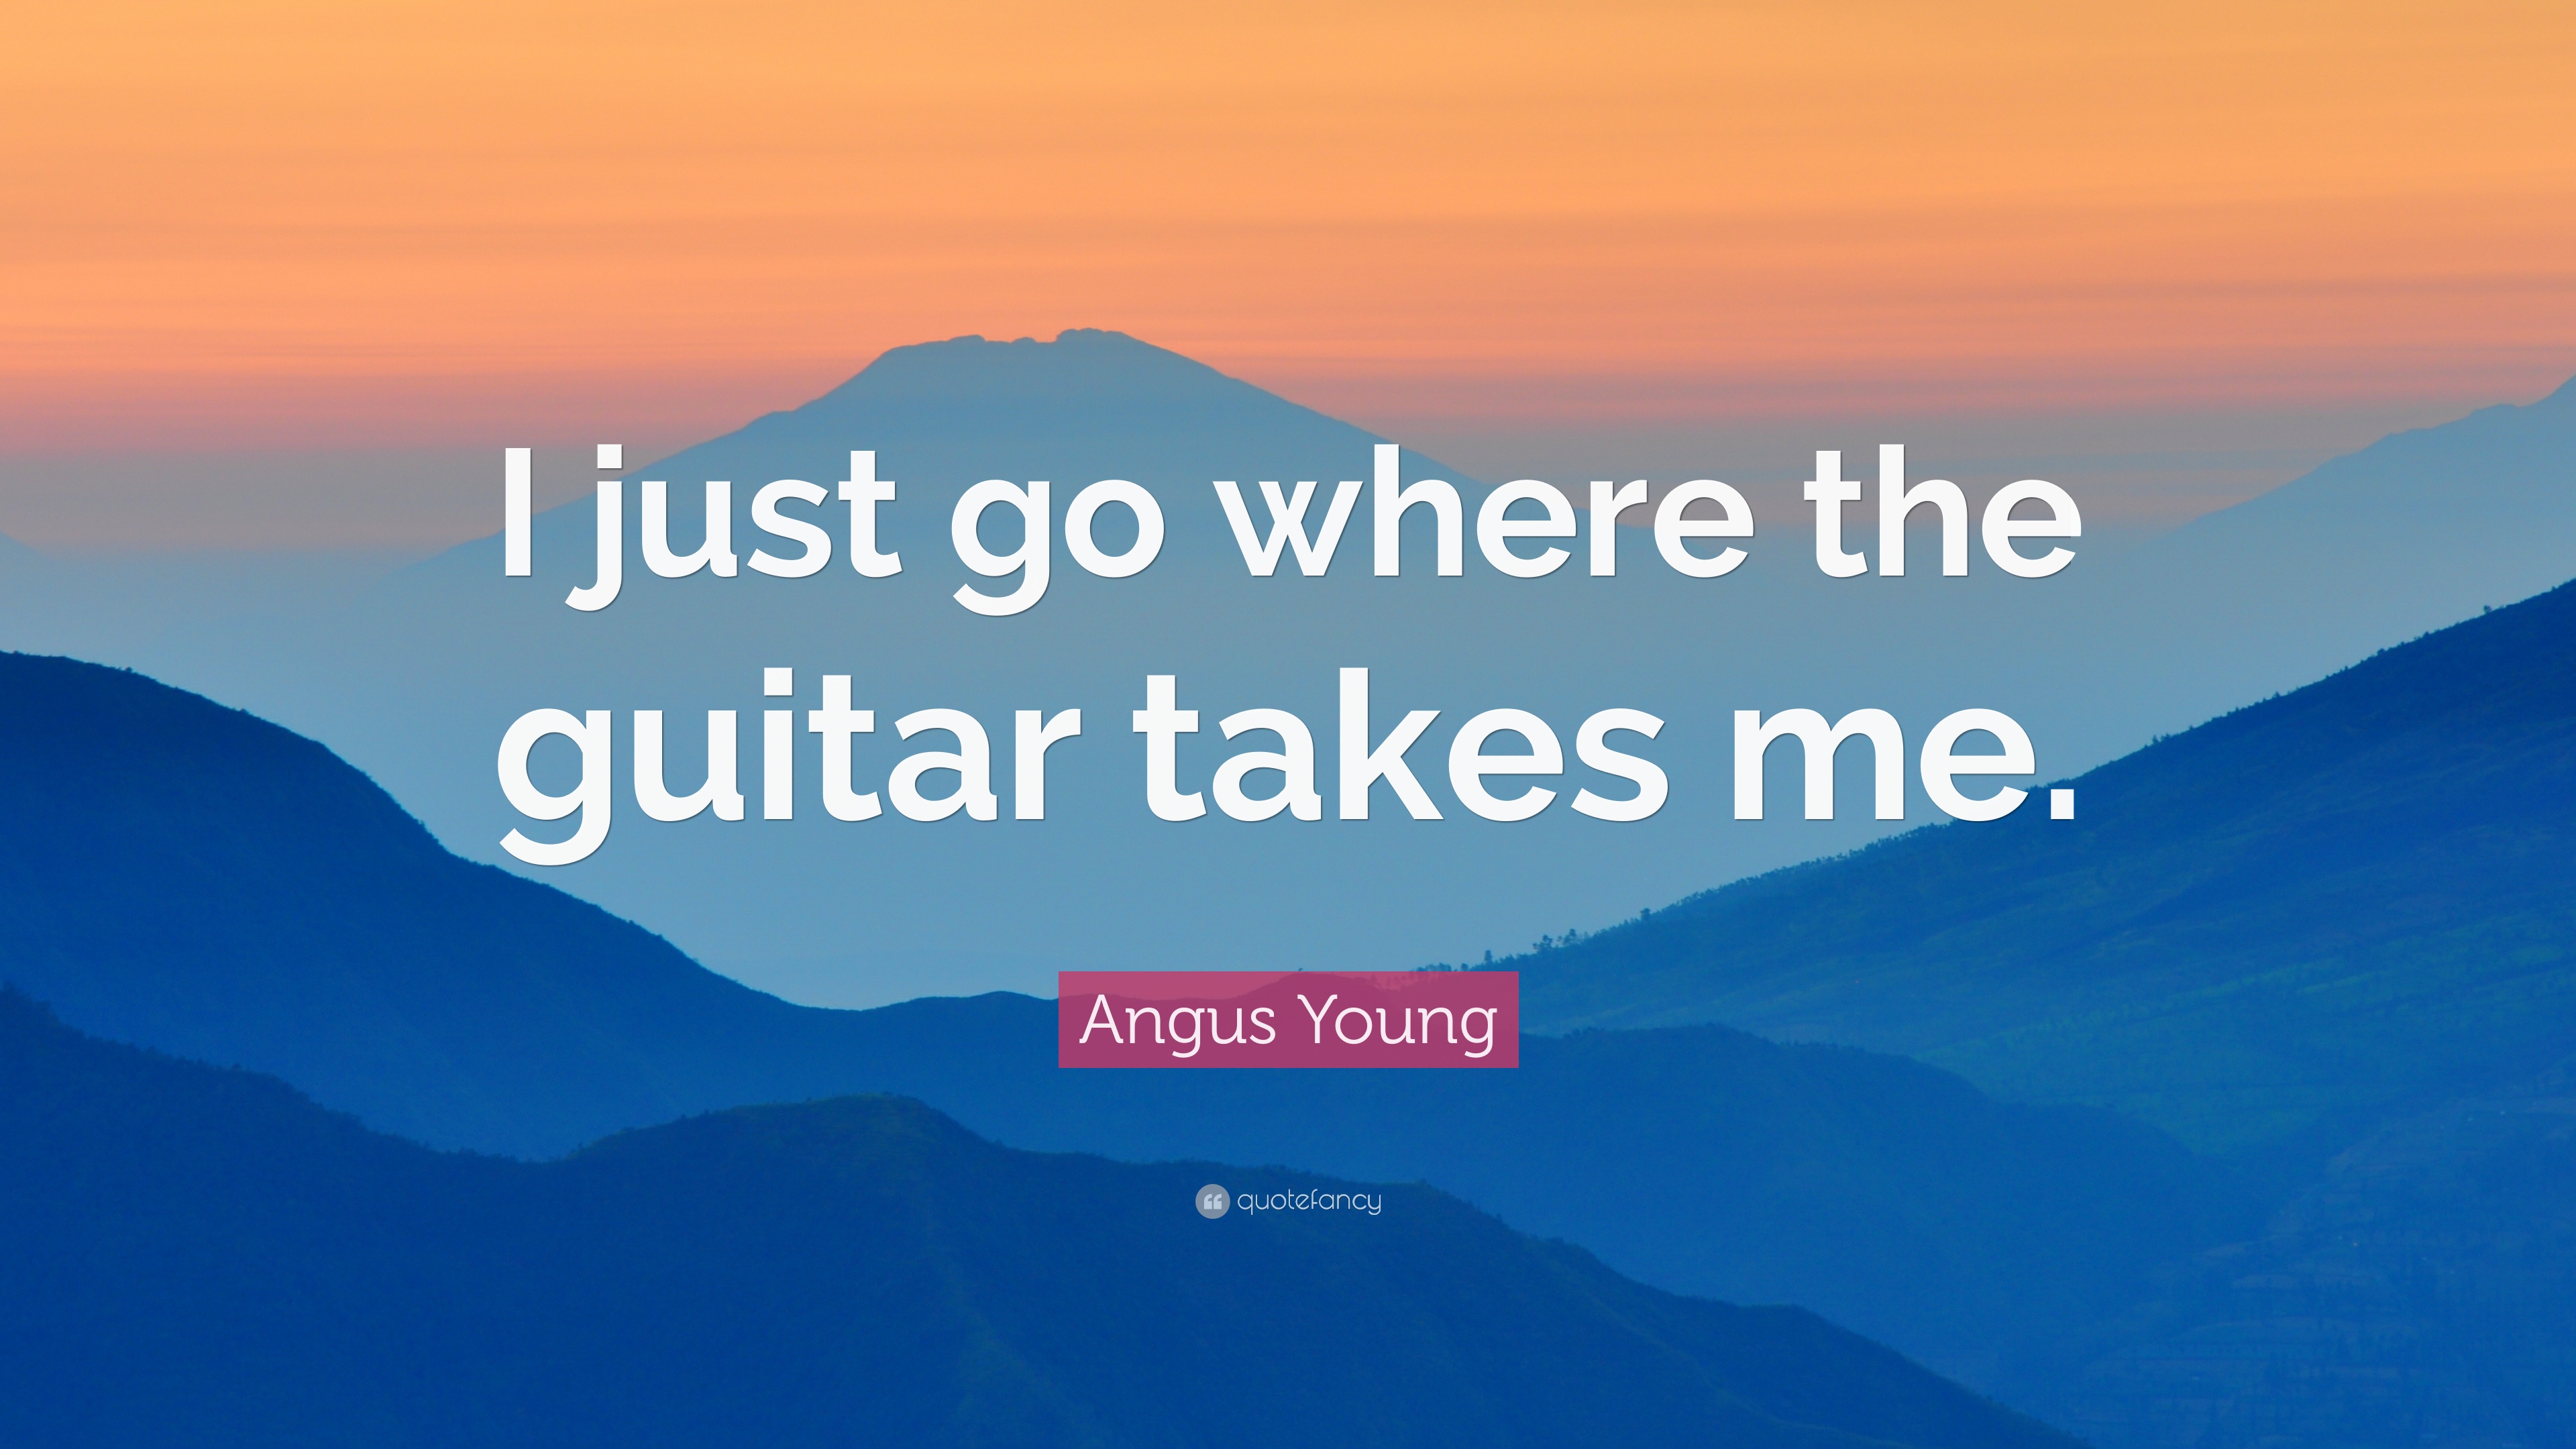 8 Angus Young Quotes About Life